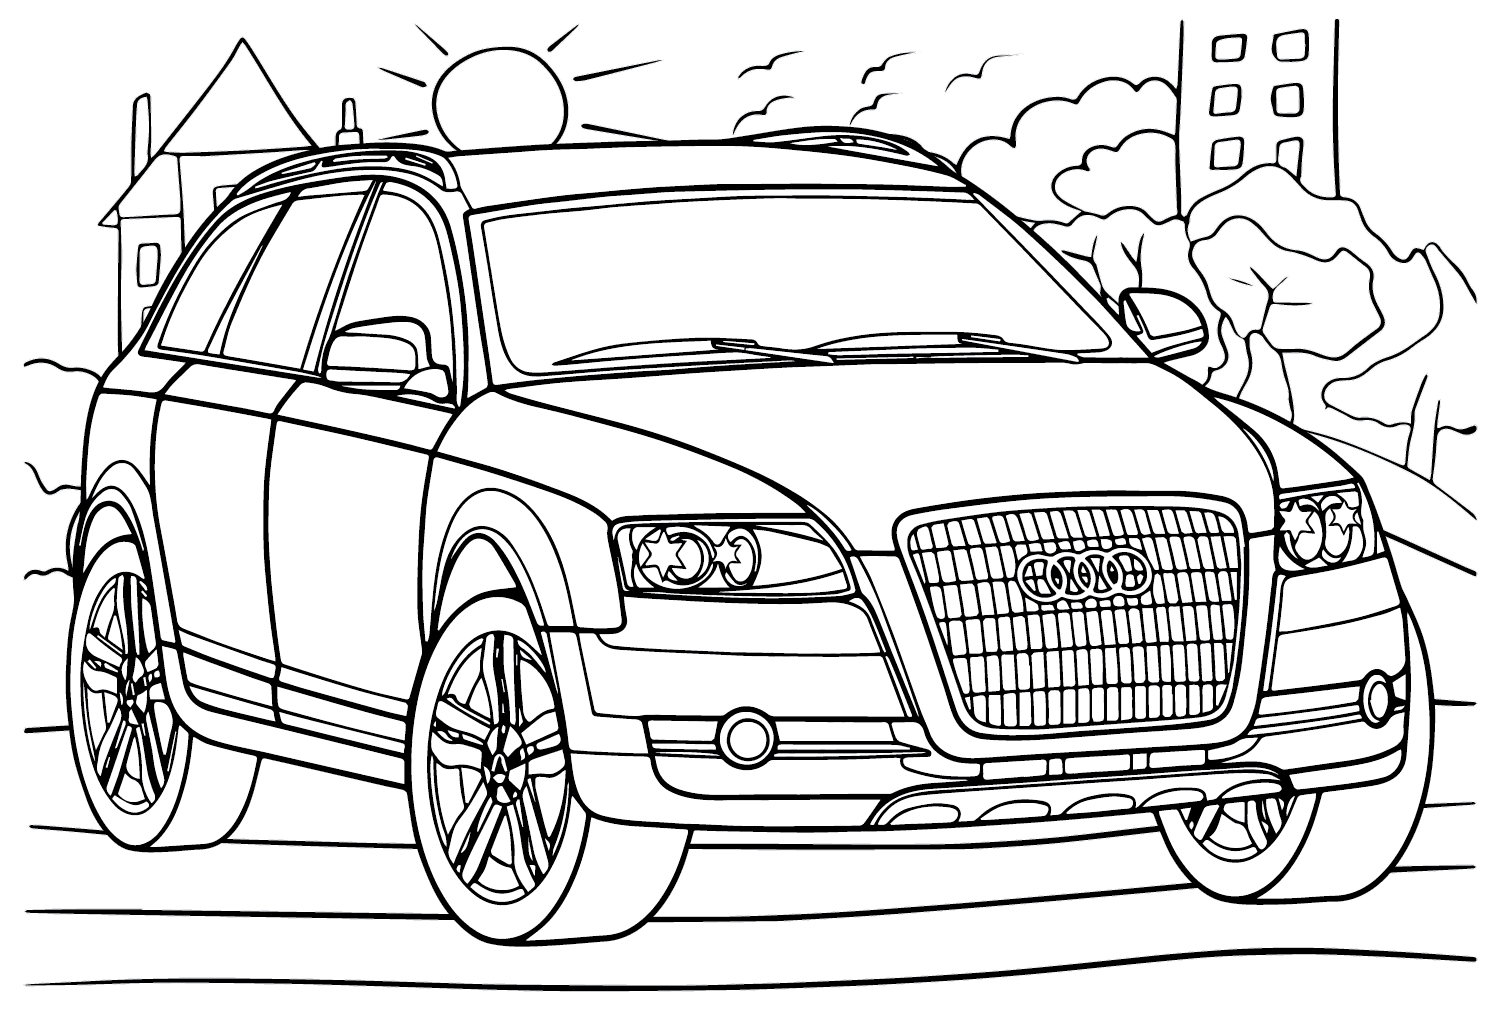 Audi A4 Allroad Quattro Coloring Page from Audi